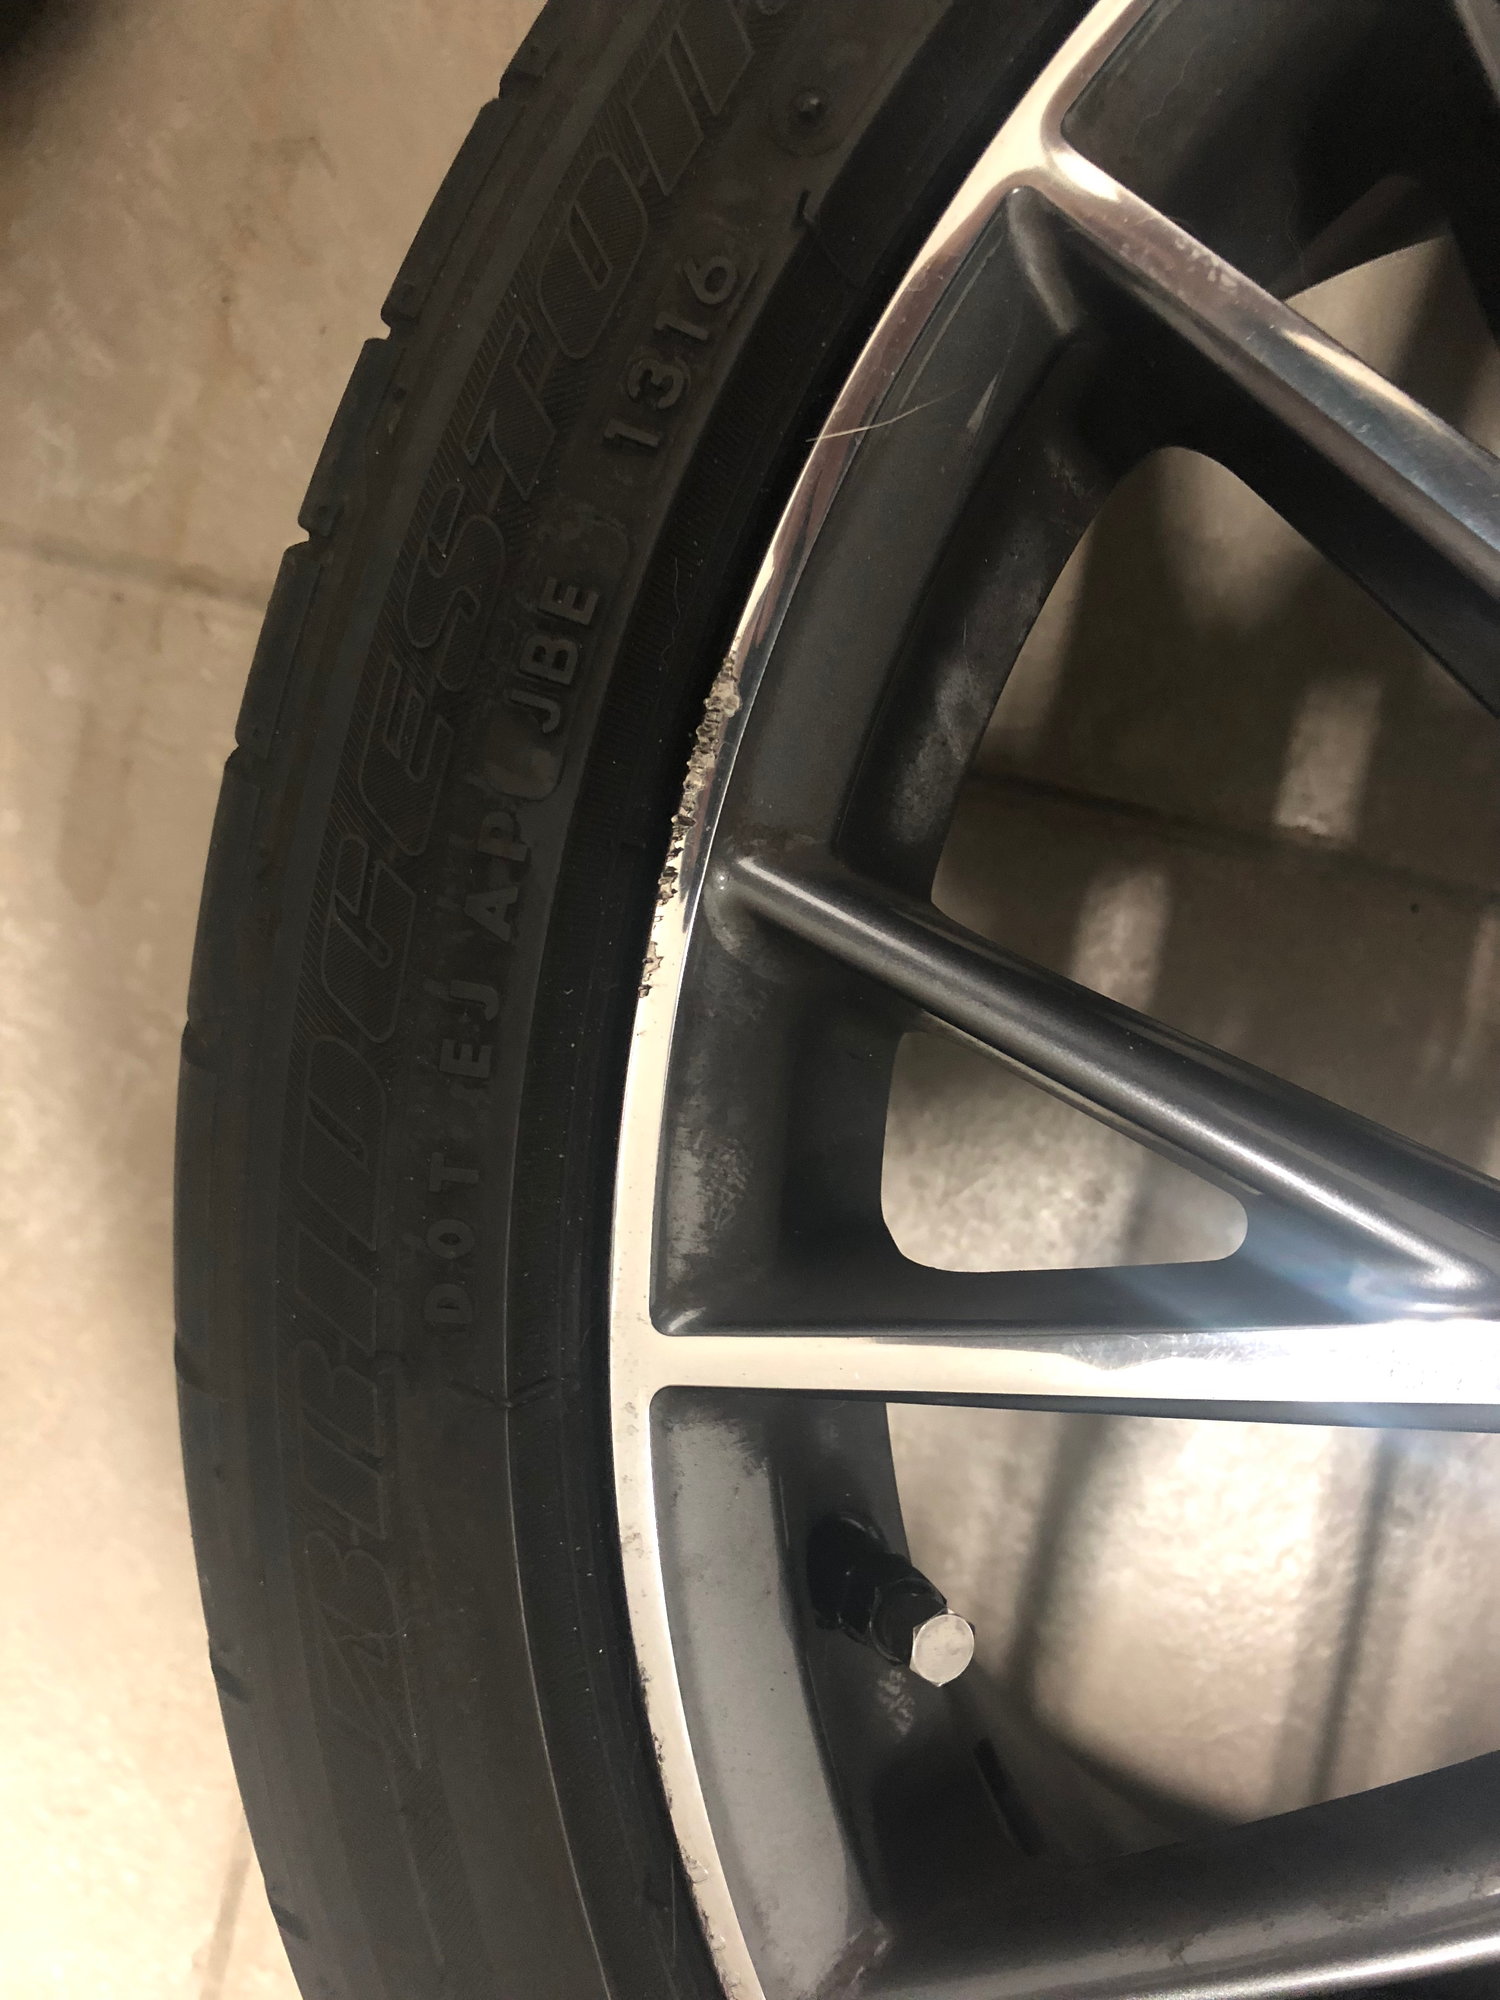 Wheels and Tires/Axles - 2015 lexus rcf wheels - Used - Miami, FL 33196, United States